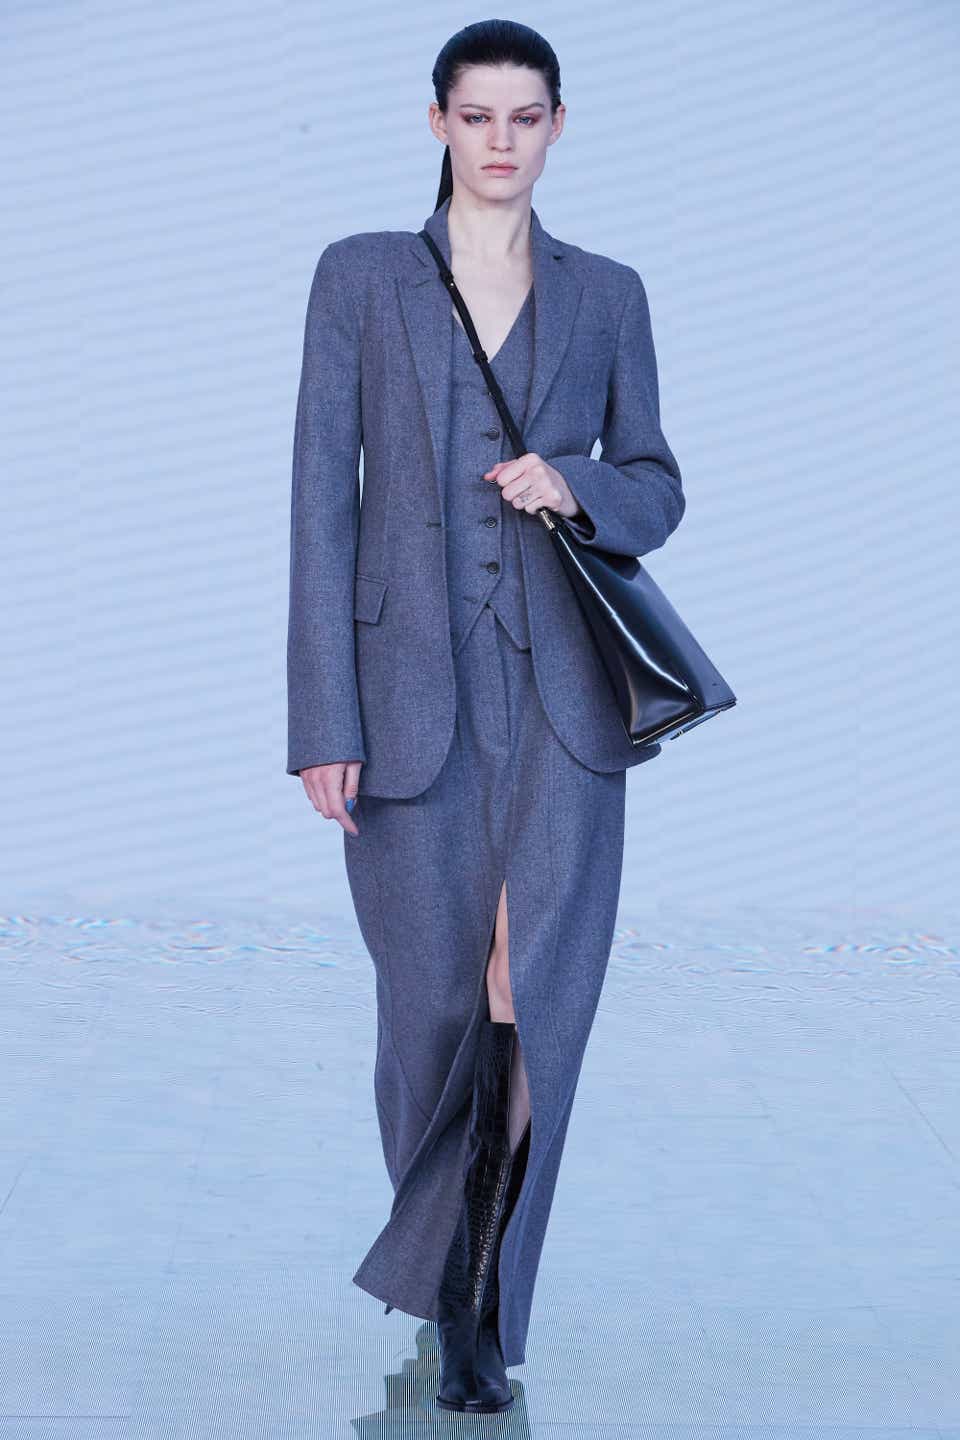 A model wearing a gray skirt suit on the Peter Do Fall 2022 runway.